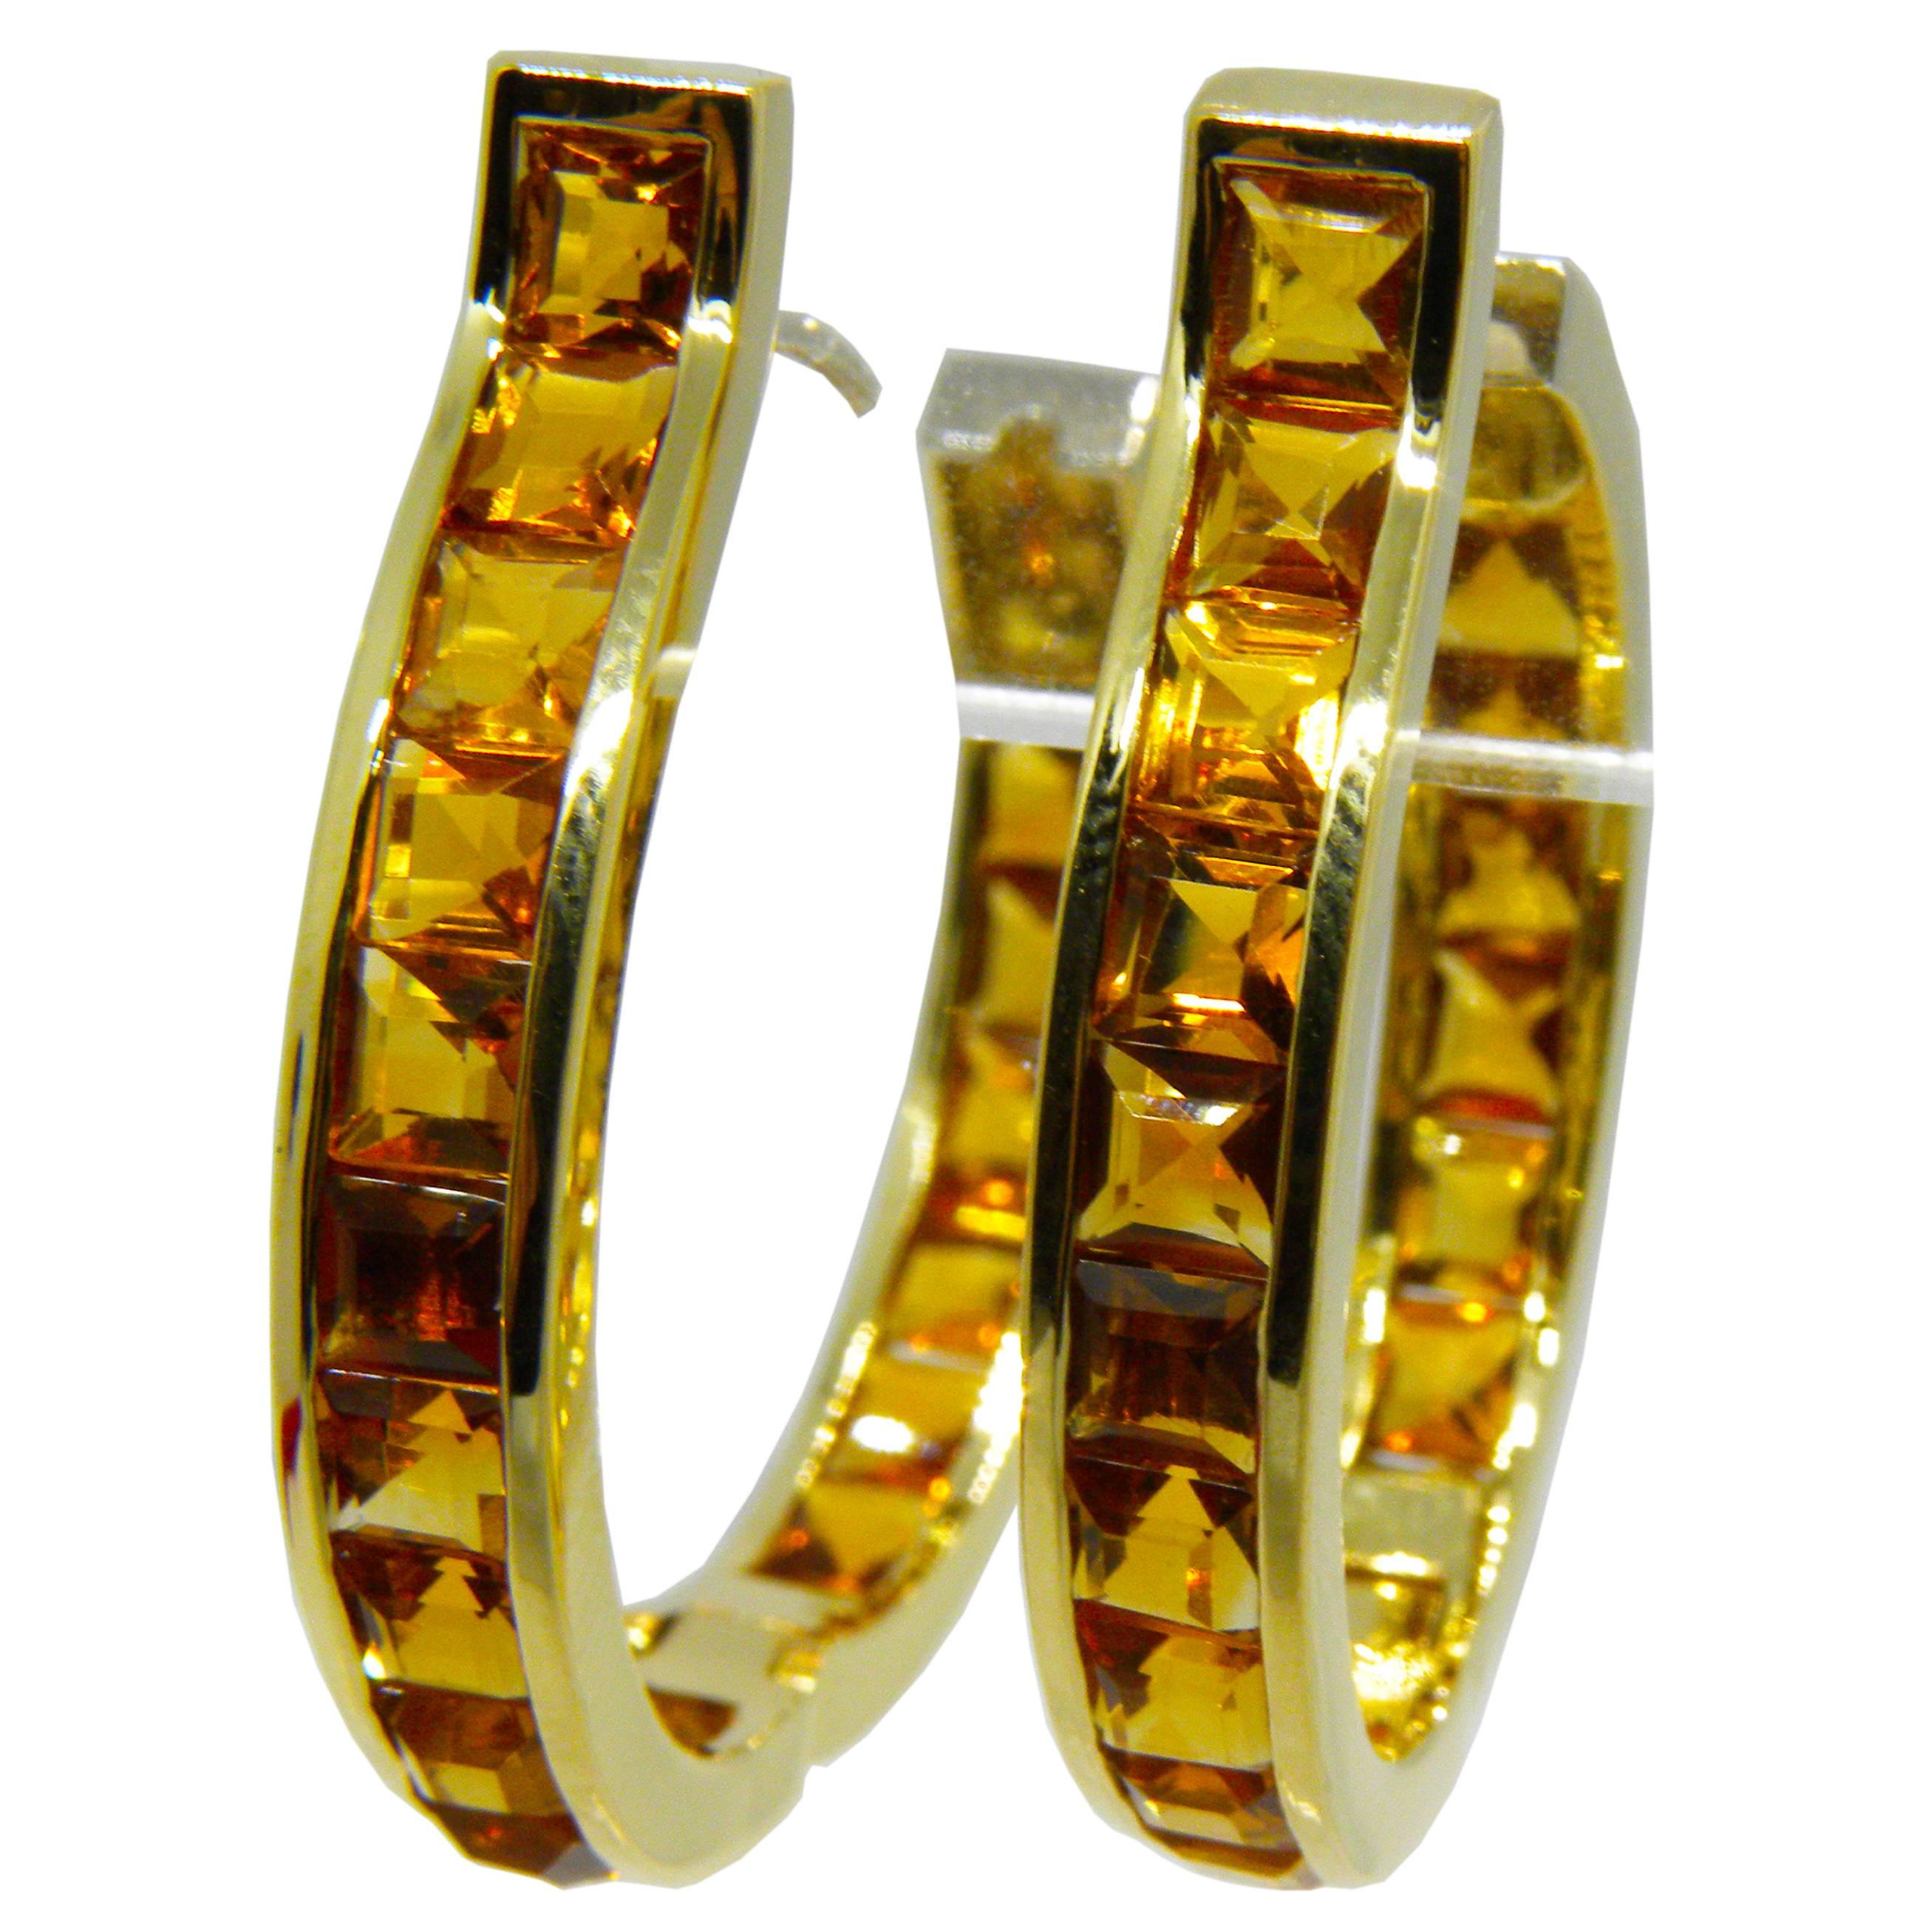 Contemporary Berca Unique Oval Square Cut Natural Citrine 18 Carat Yellow Gold Hoop Earrings For Sale